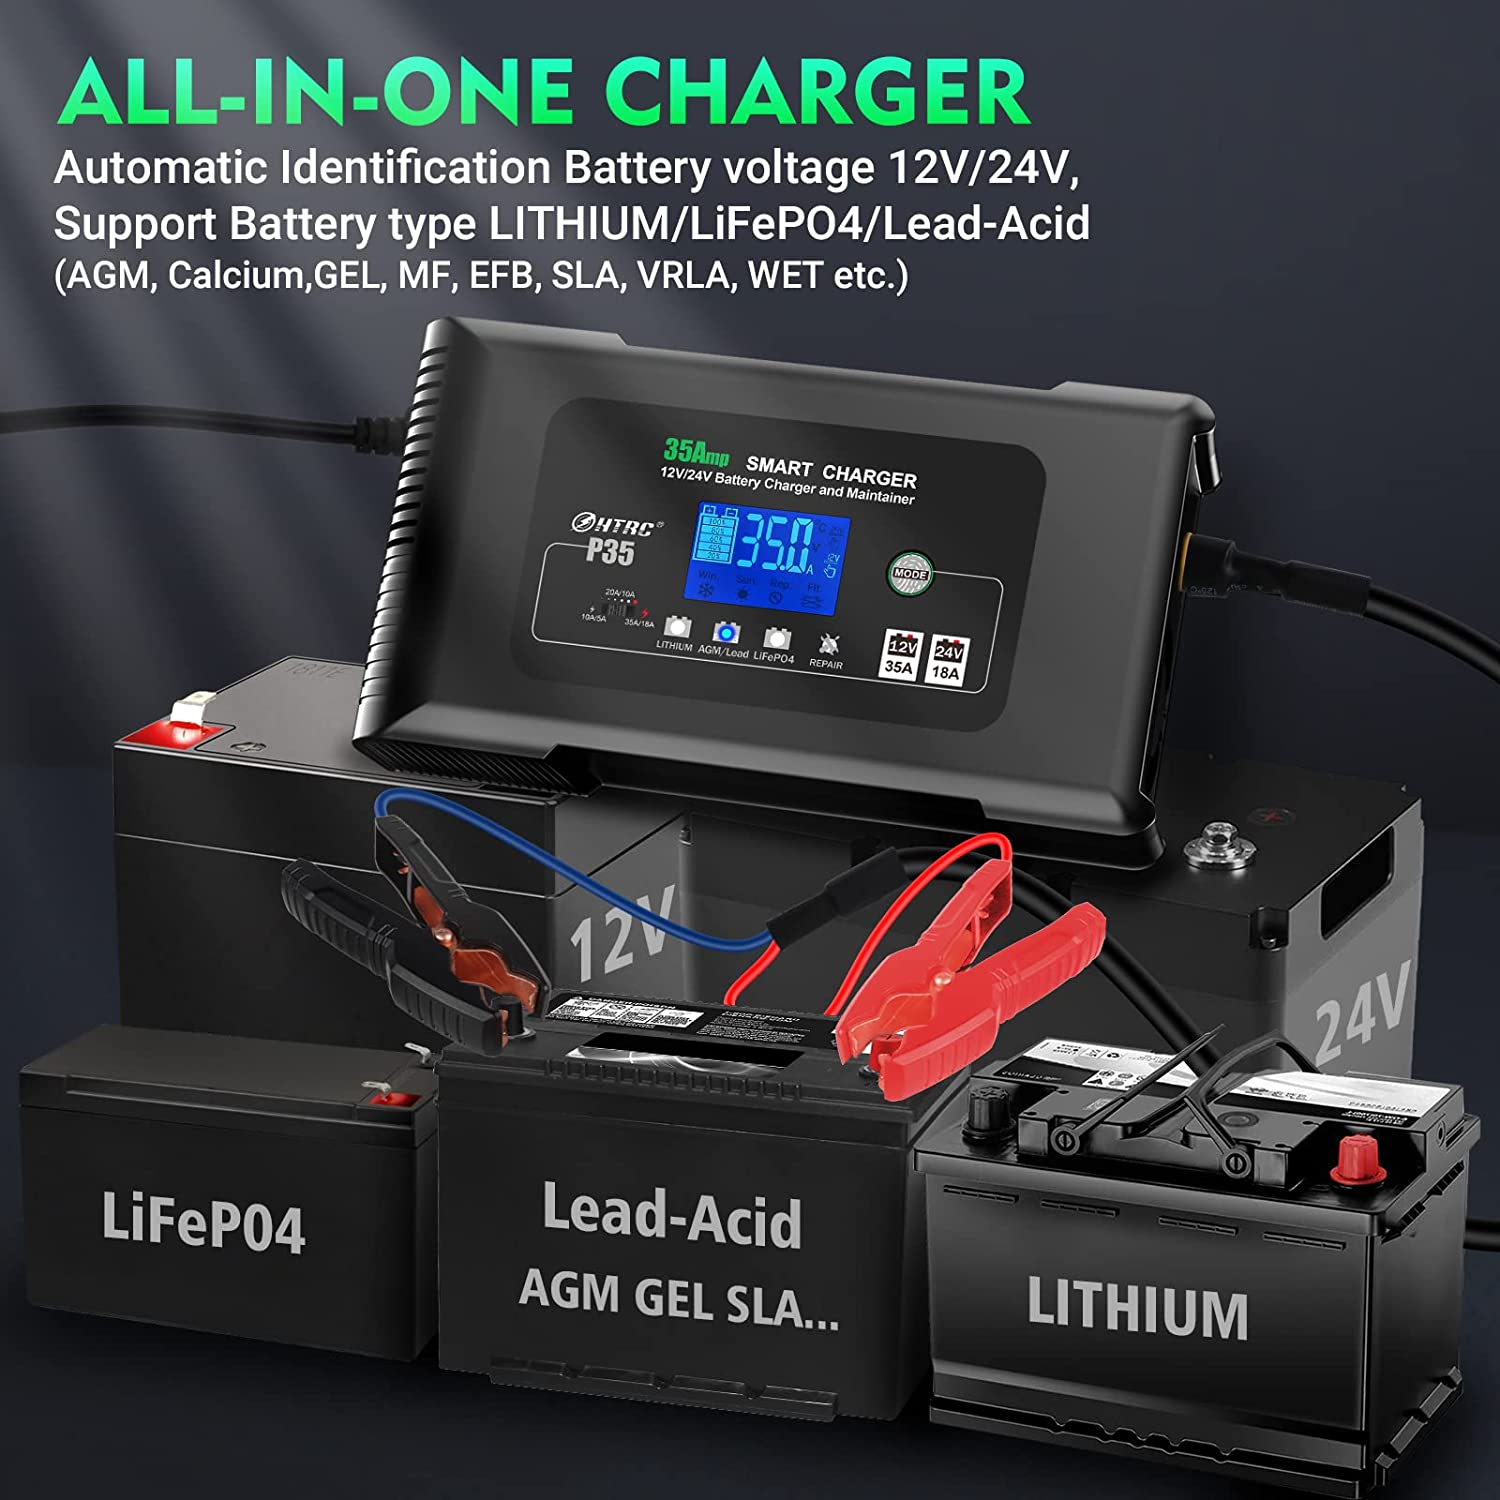 HTRC 35-Amp Smart Charger, Car Battery Charger,Trickle Charger, 12V35A